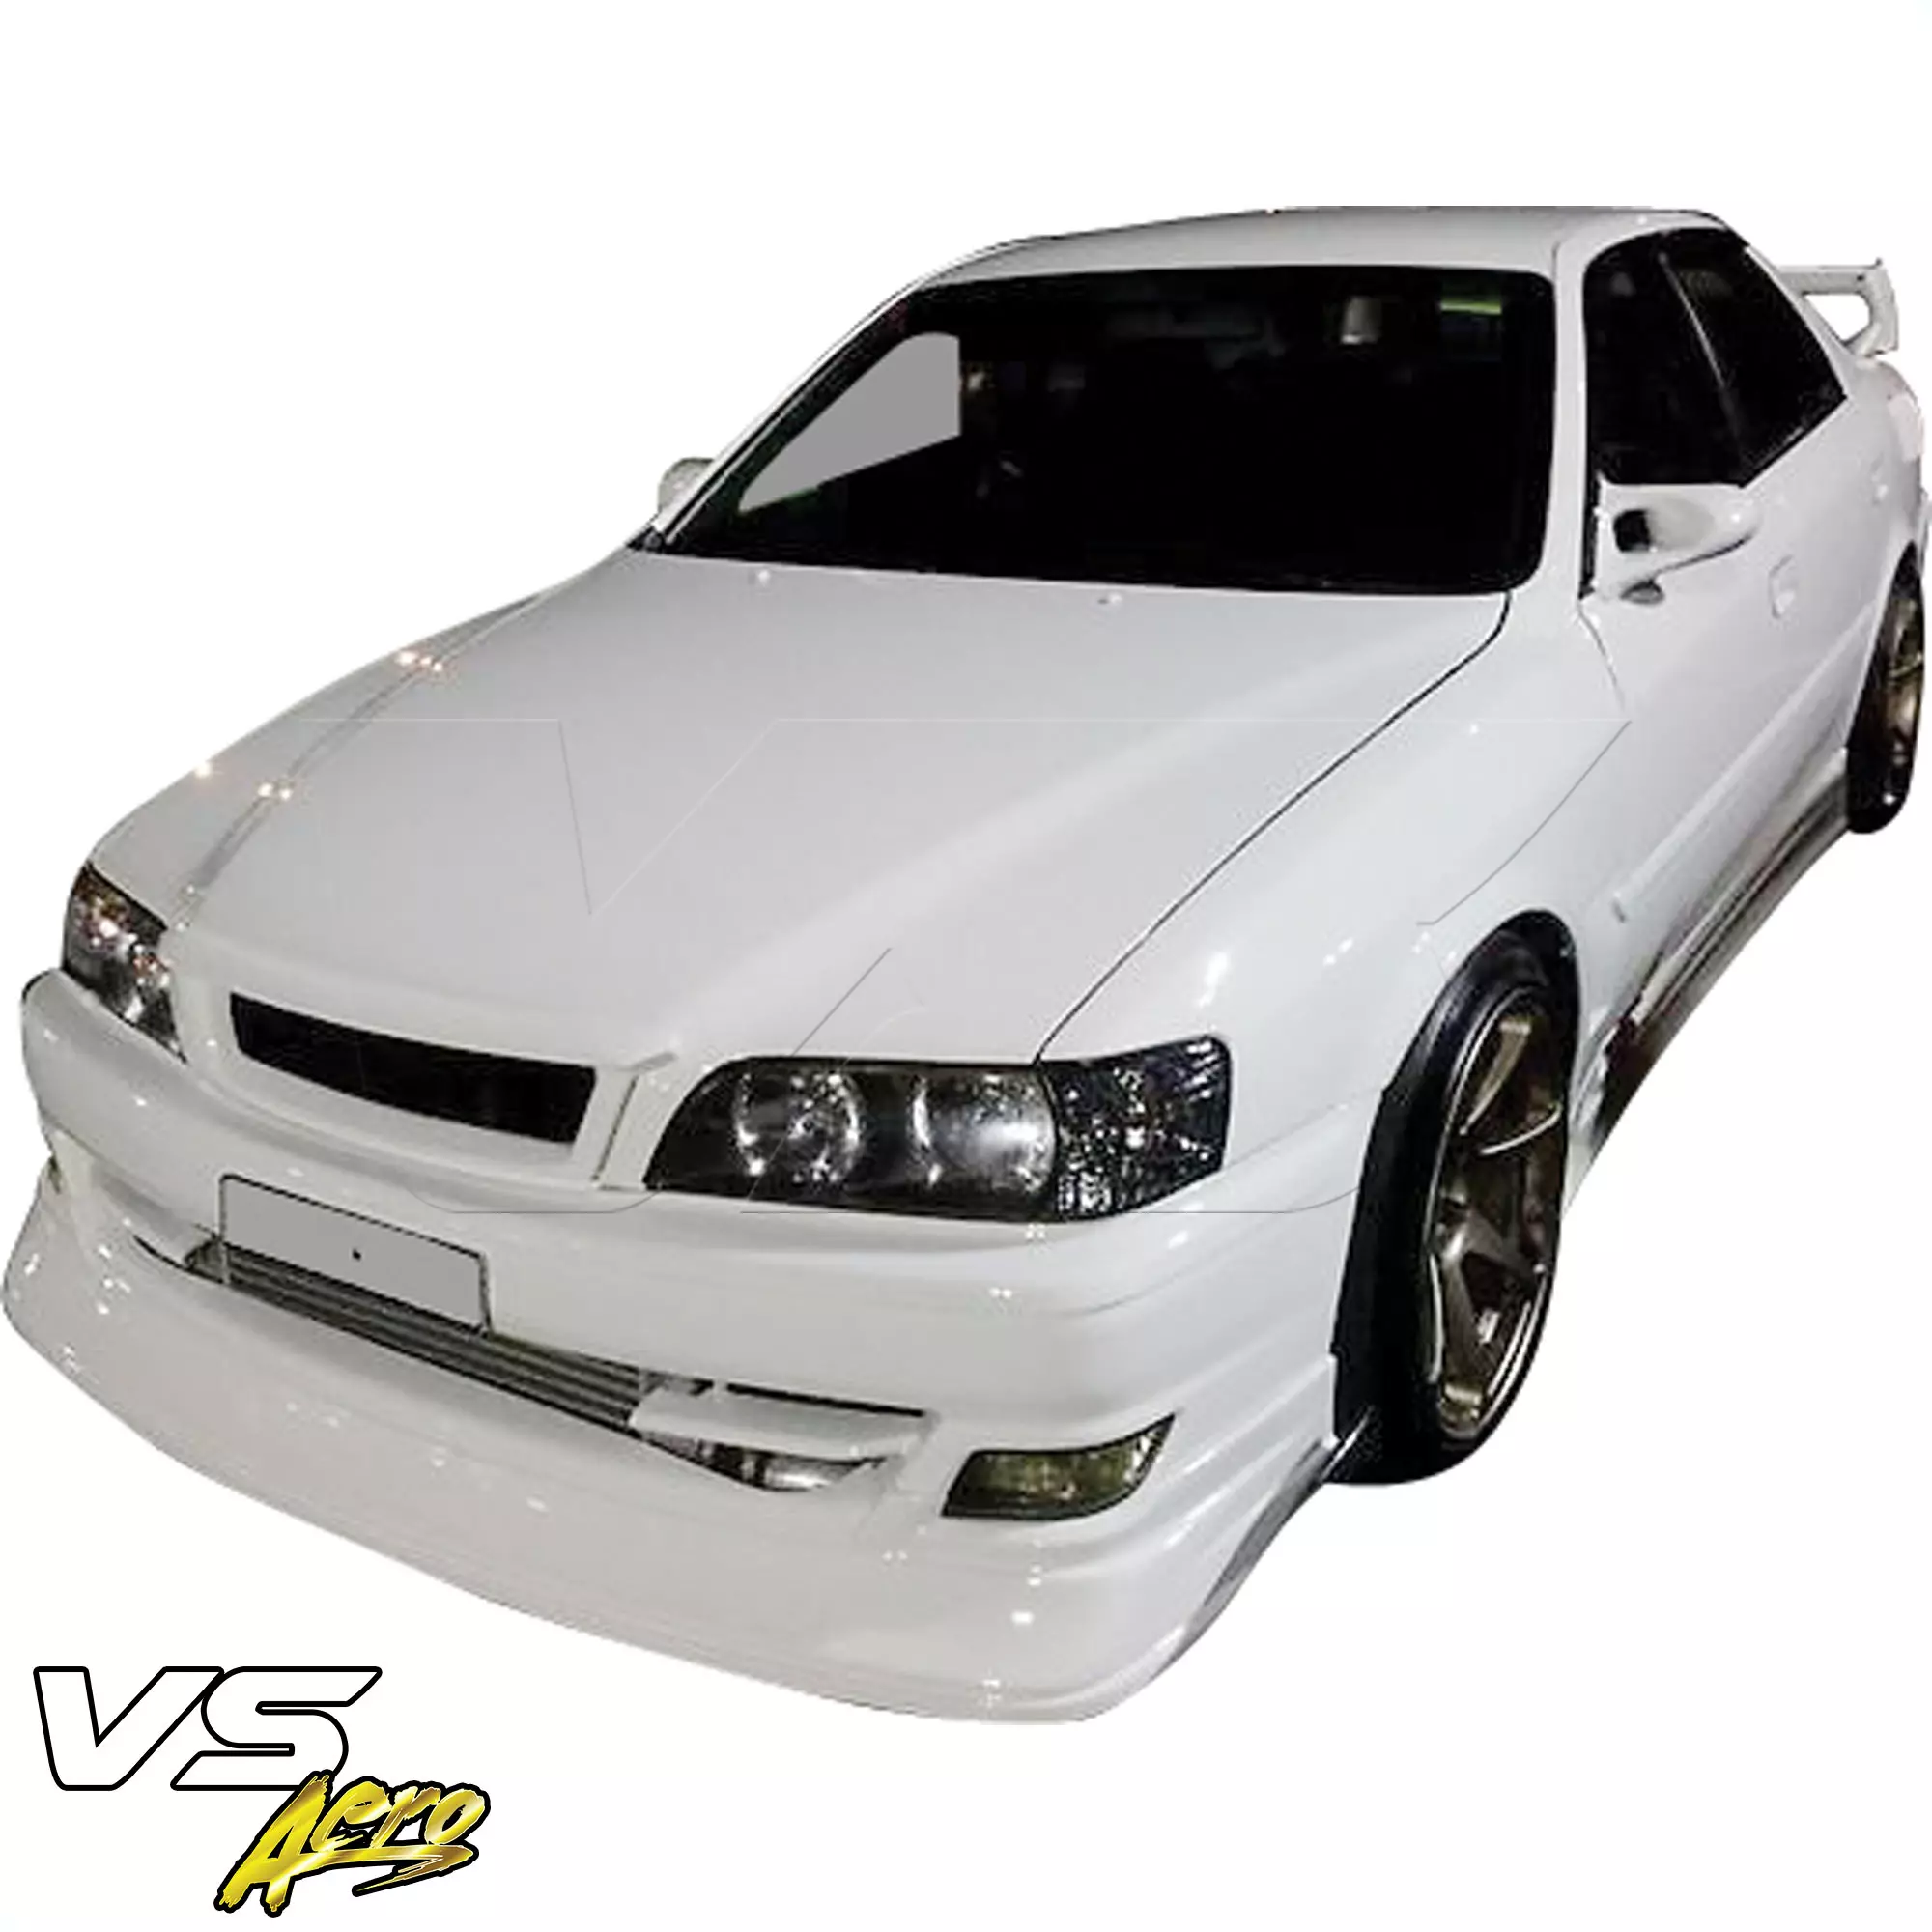 VSaero FRP TRAU Late Front Lip Valance > Toyota Chaser JZX100 1999-2000 - Image 6